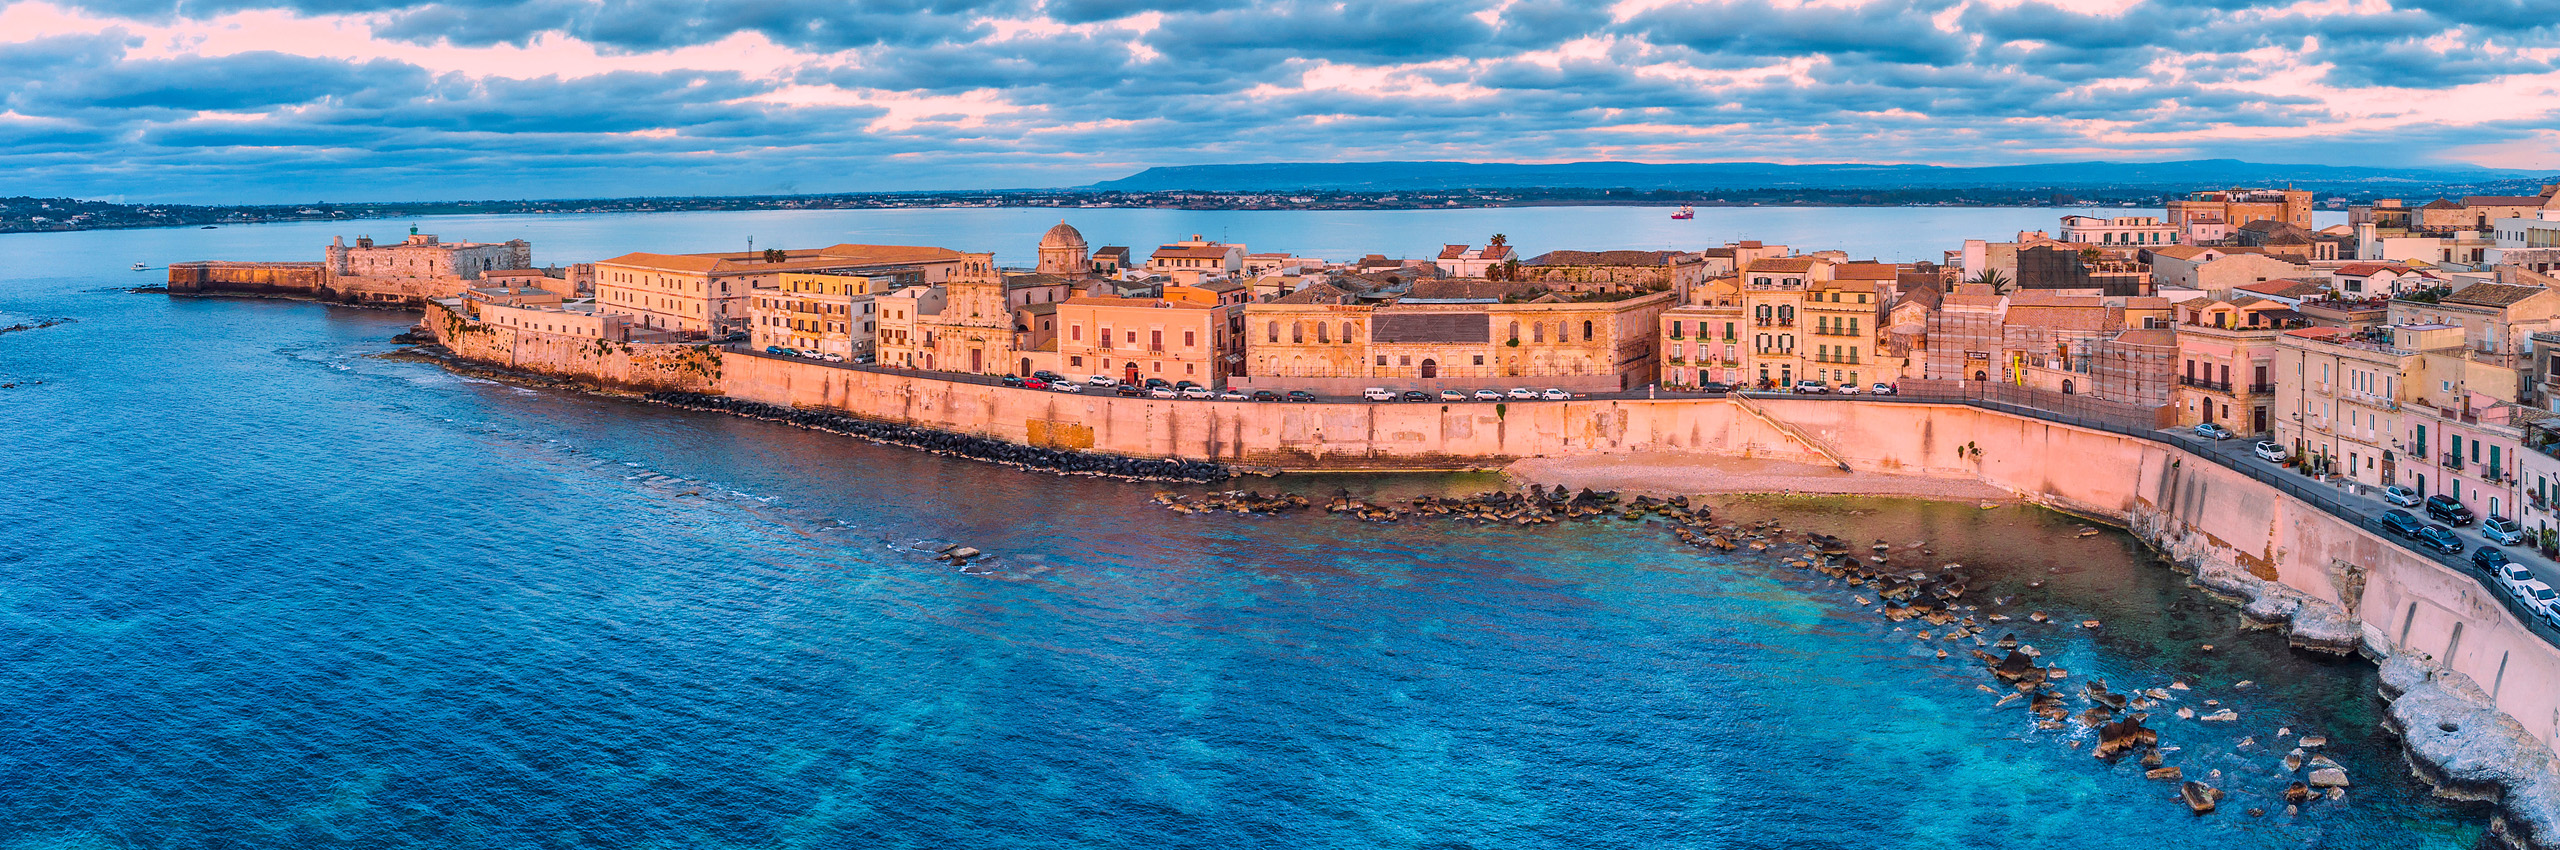 41217706 | Italy/Sicily, Siracusa district, Siracusa, Ortigia | © Alessandro Saffo/HUBER IMAGES